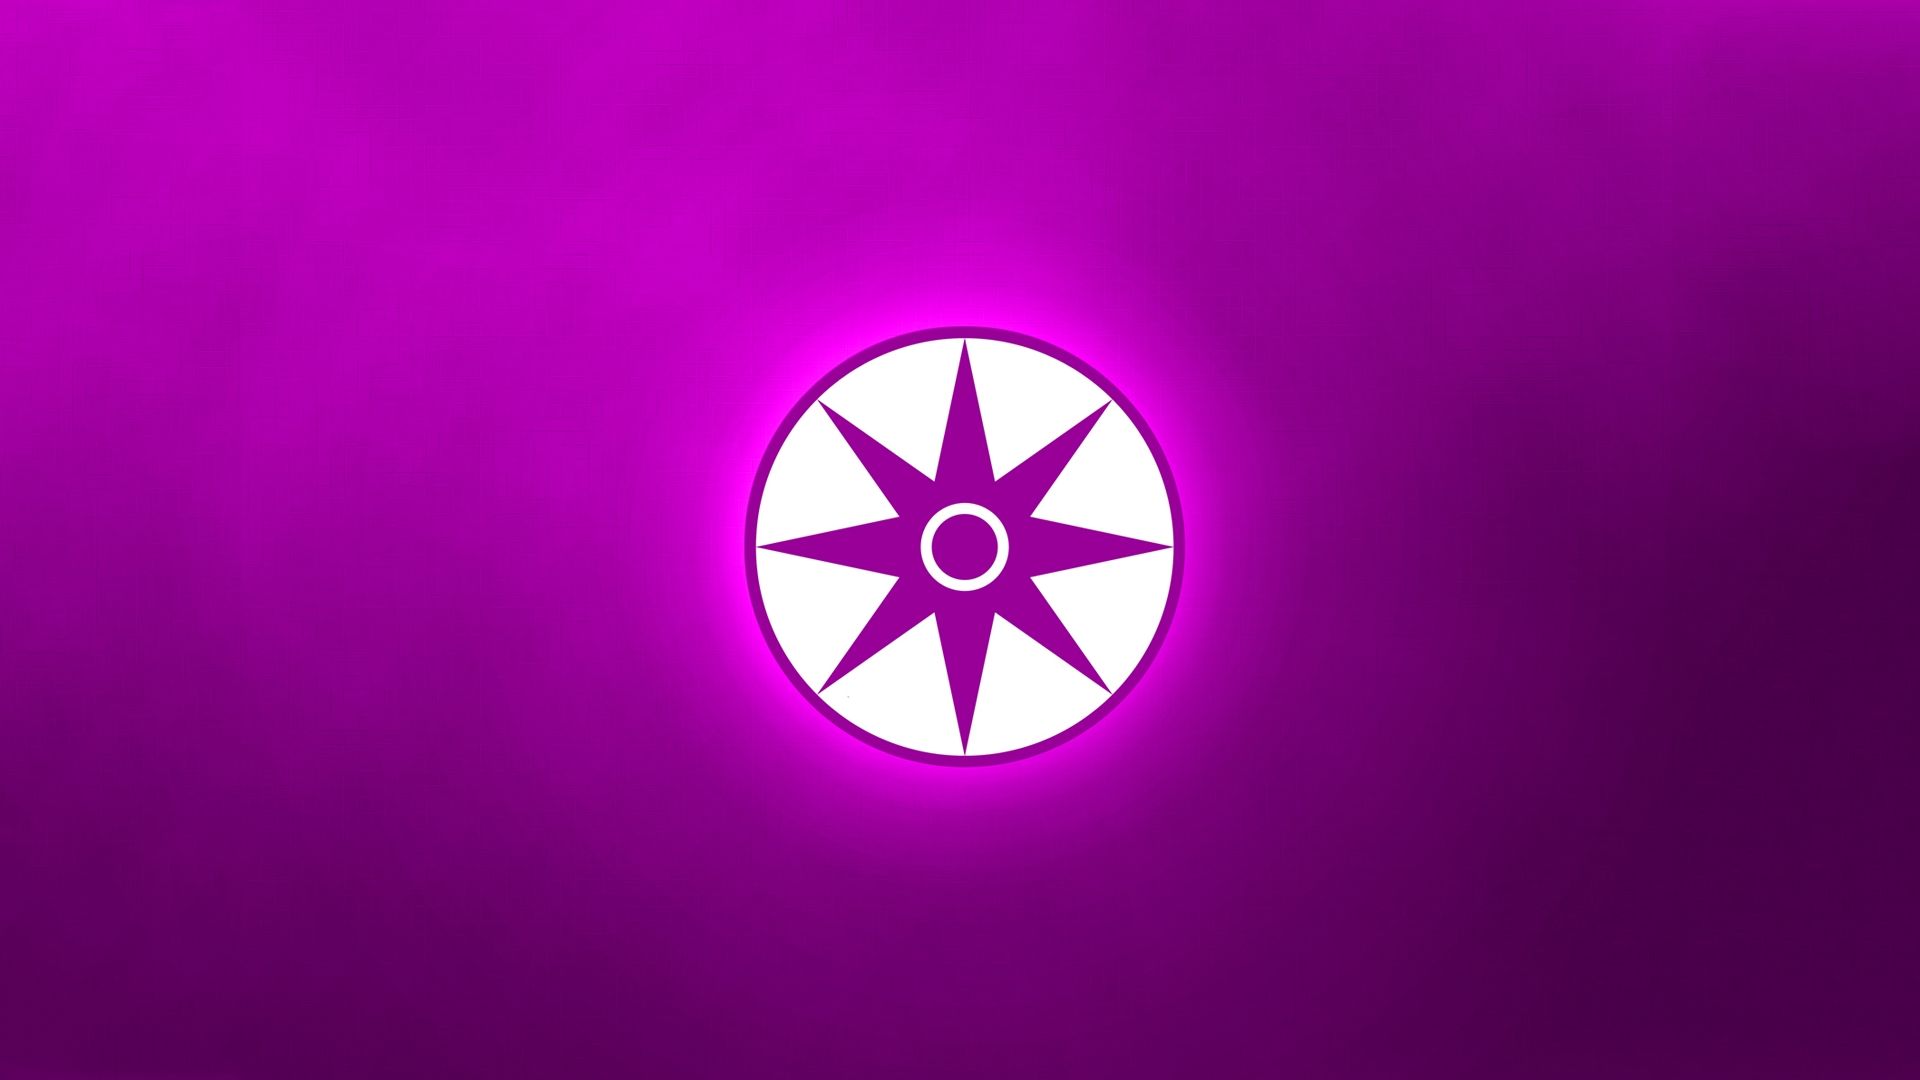 Tons of awesome Star Sapphire Oath wallpapers to download for free. 